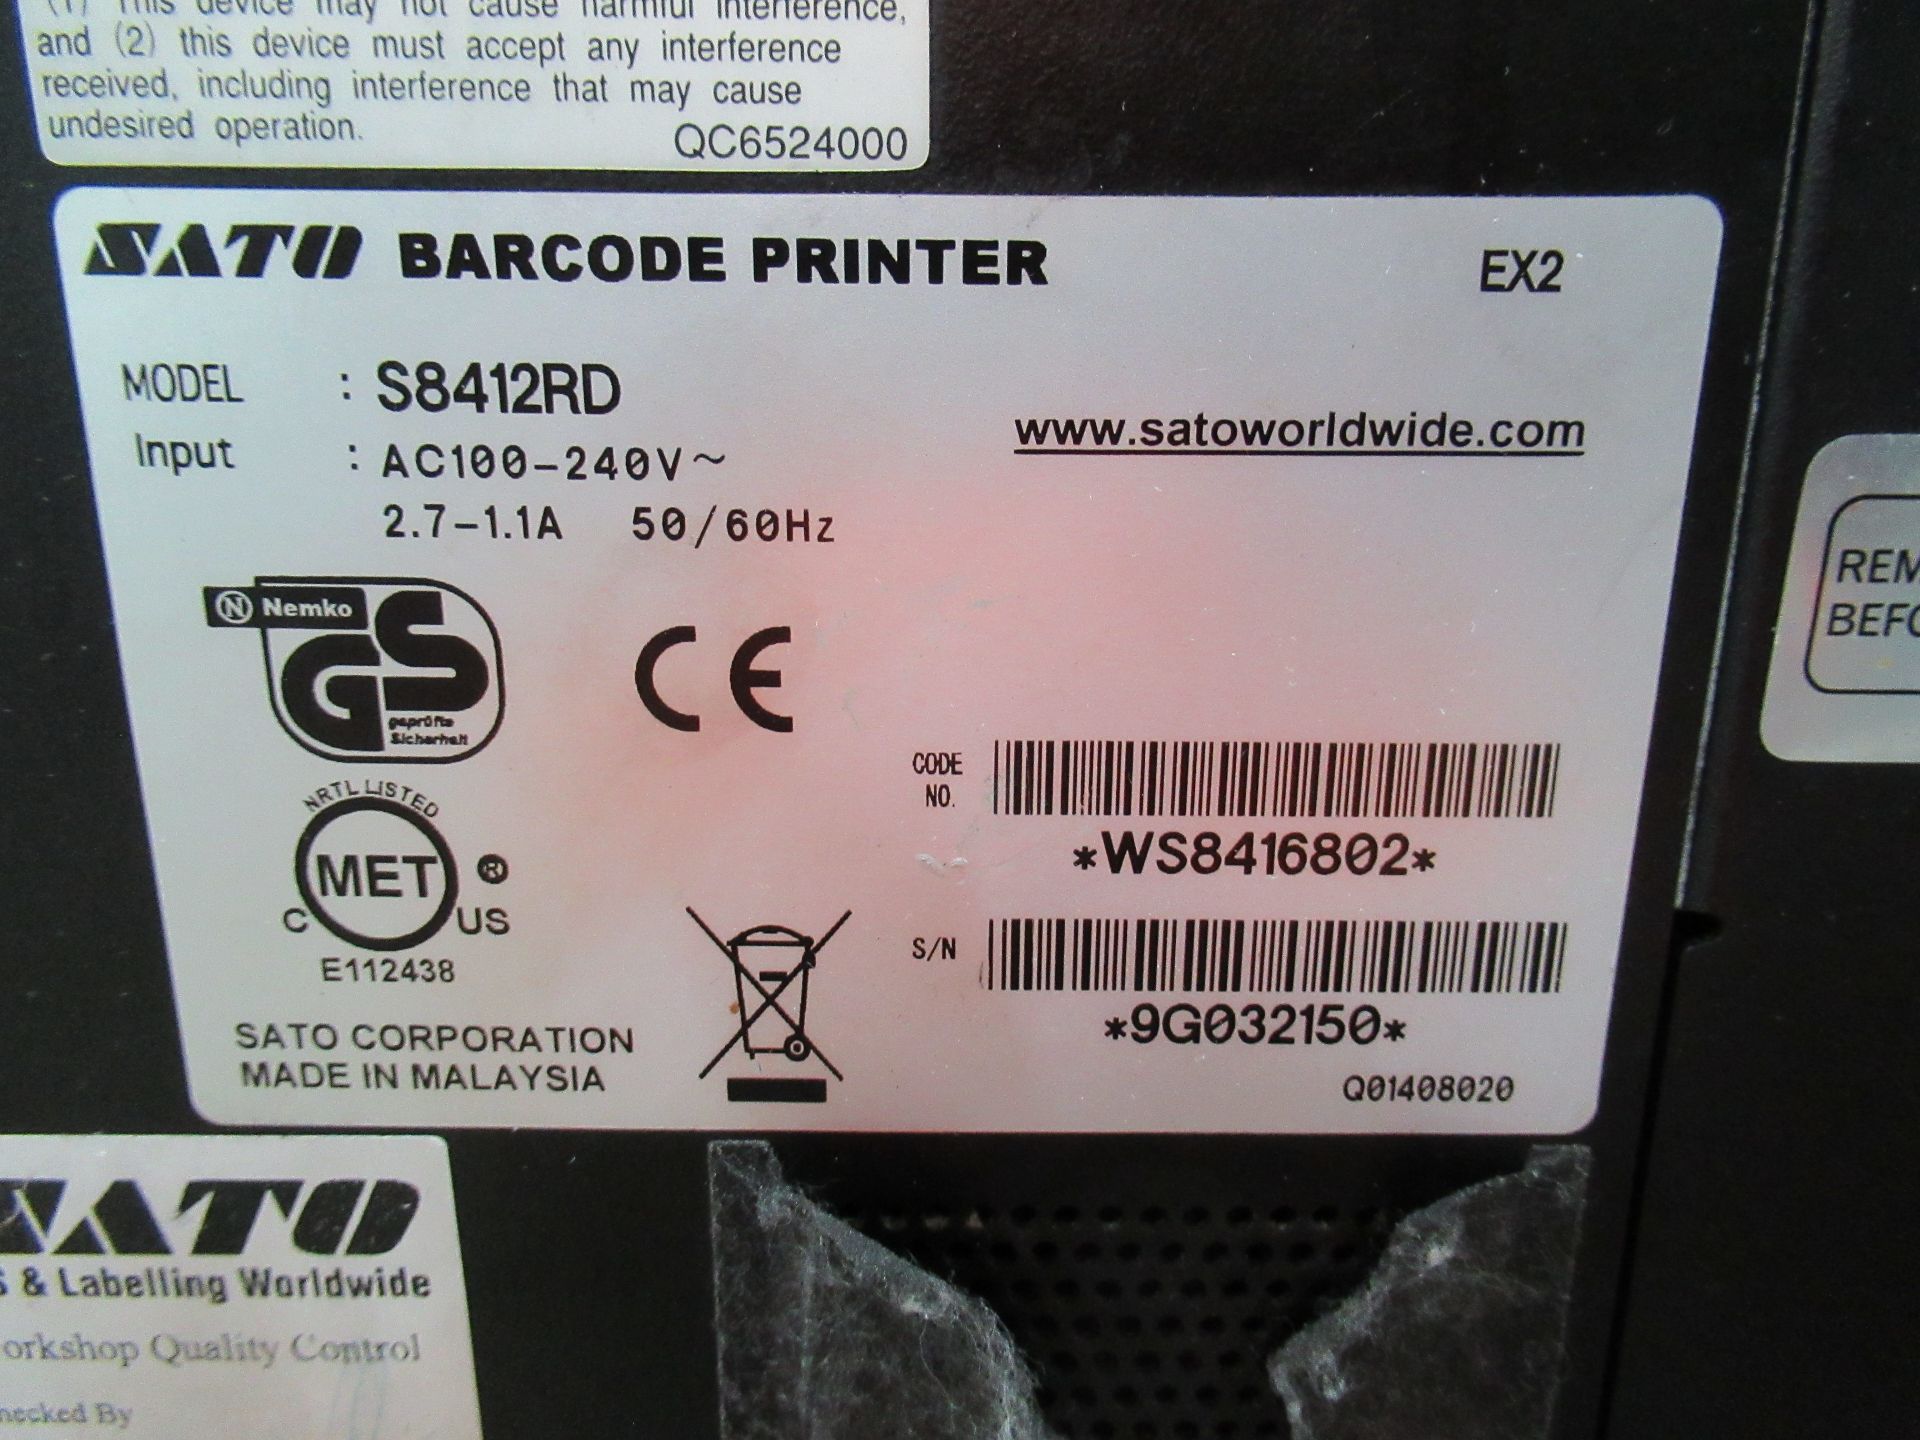 Altech Alcode label applicator with Sato S8412RD label printer Serial no: 9G032150 mounted on - Image 9 of 12